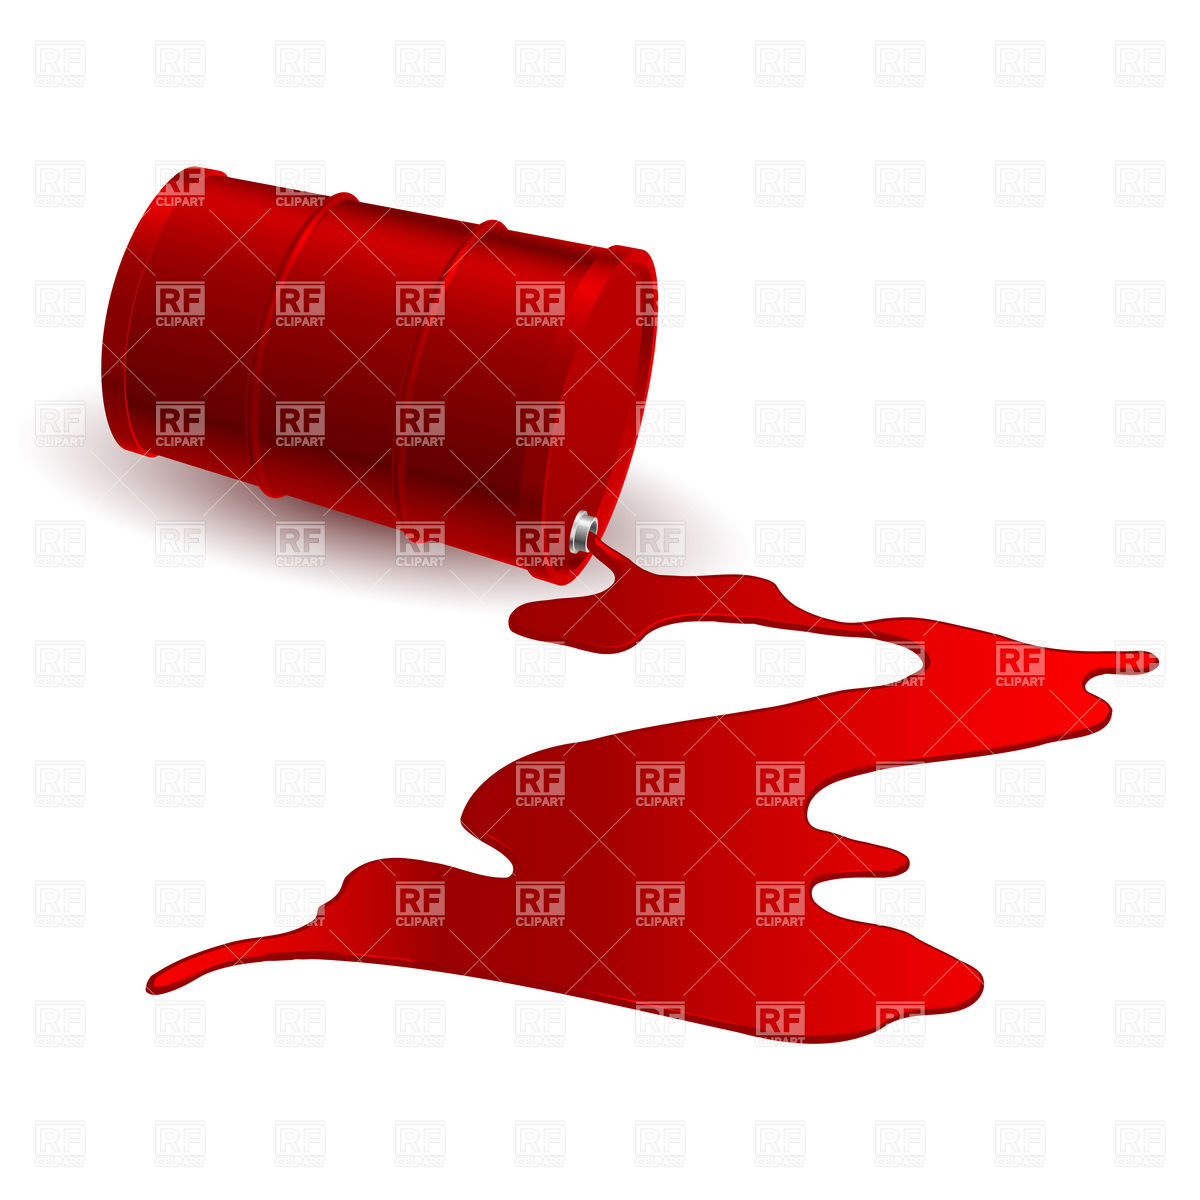 Oil Drum And Spilled Red Liquid Download Royalty Free Vector Clipart    